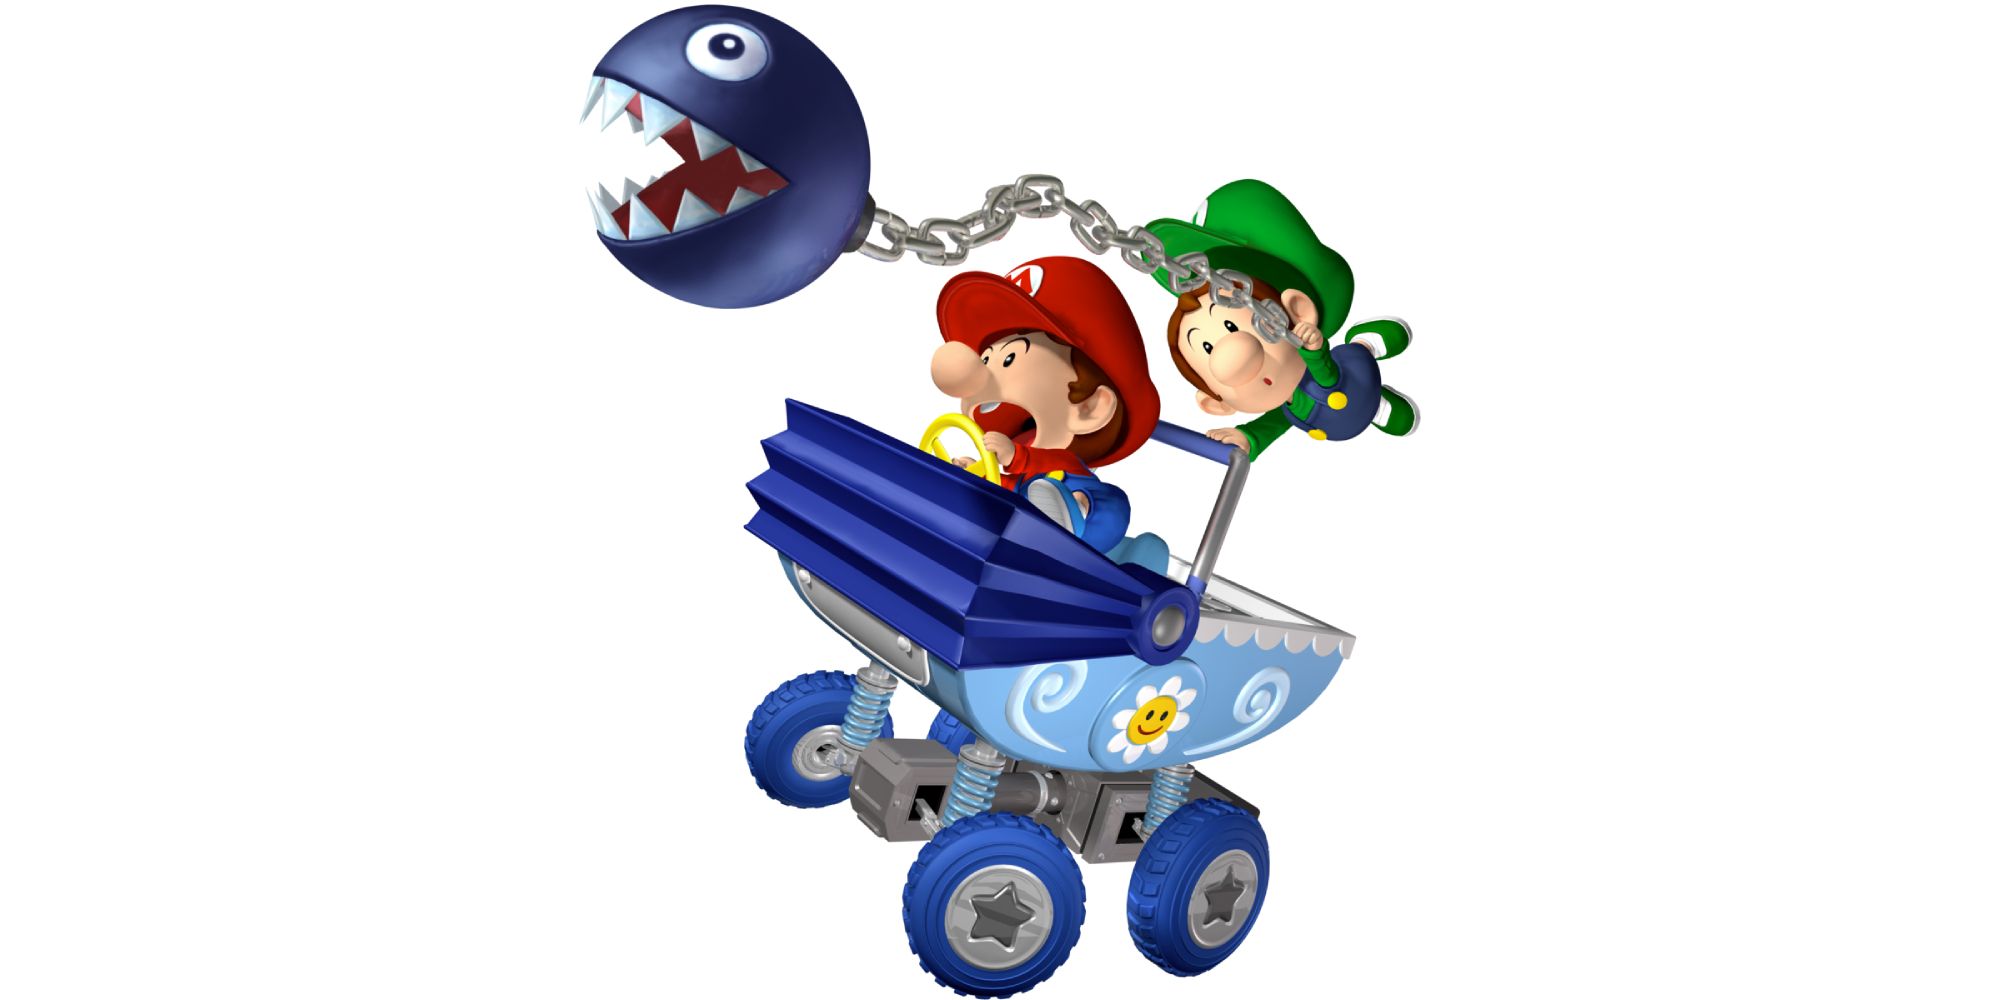 Mario Kart Vehicle Designs Baby Mario and Baby Luigi on the Goo-Goo Buggy kart with a chain chomp pulling them forwards